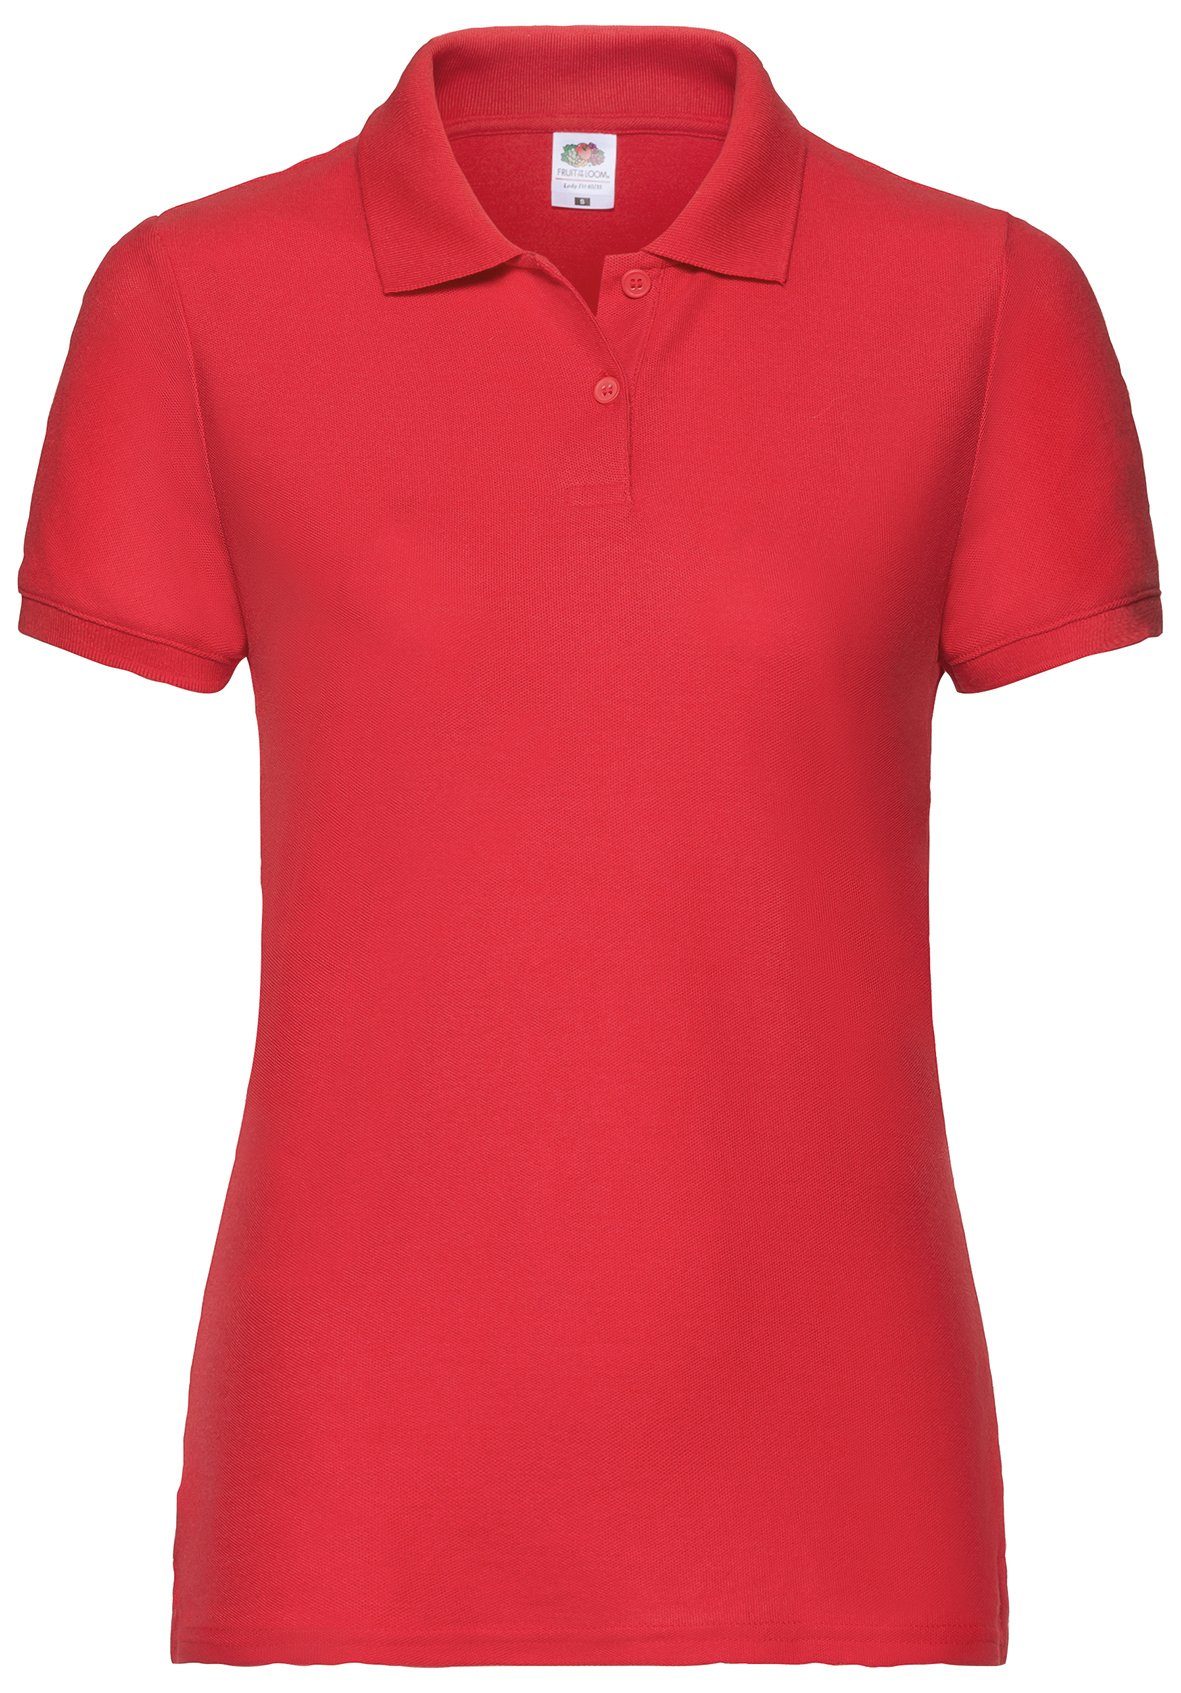 Fruit of the Loom Poloshirt Fruit of the Loom 65/35 Polo Lady-Fit rot